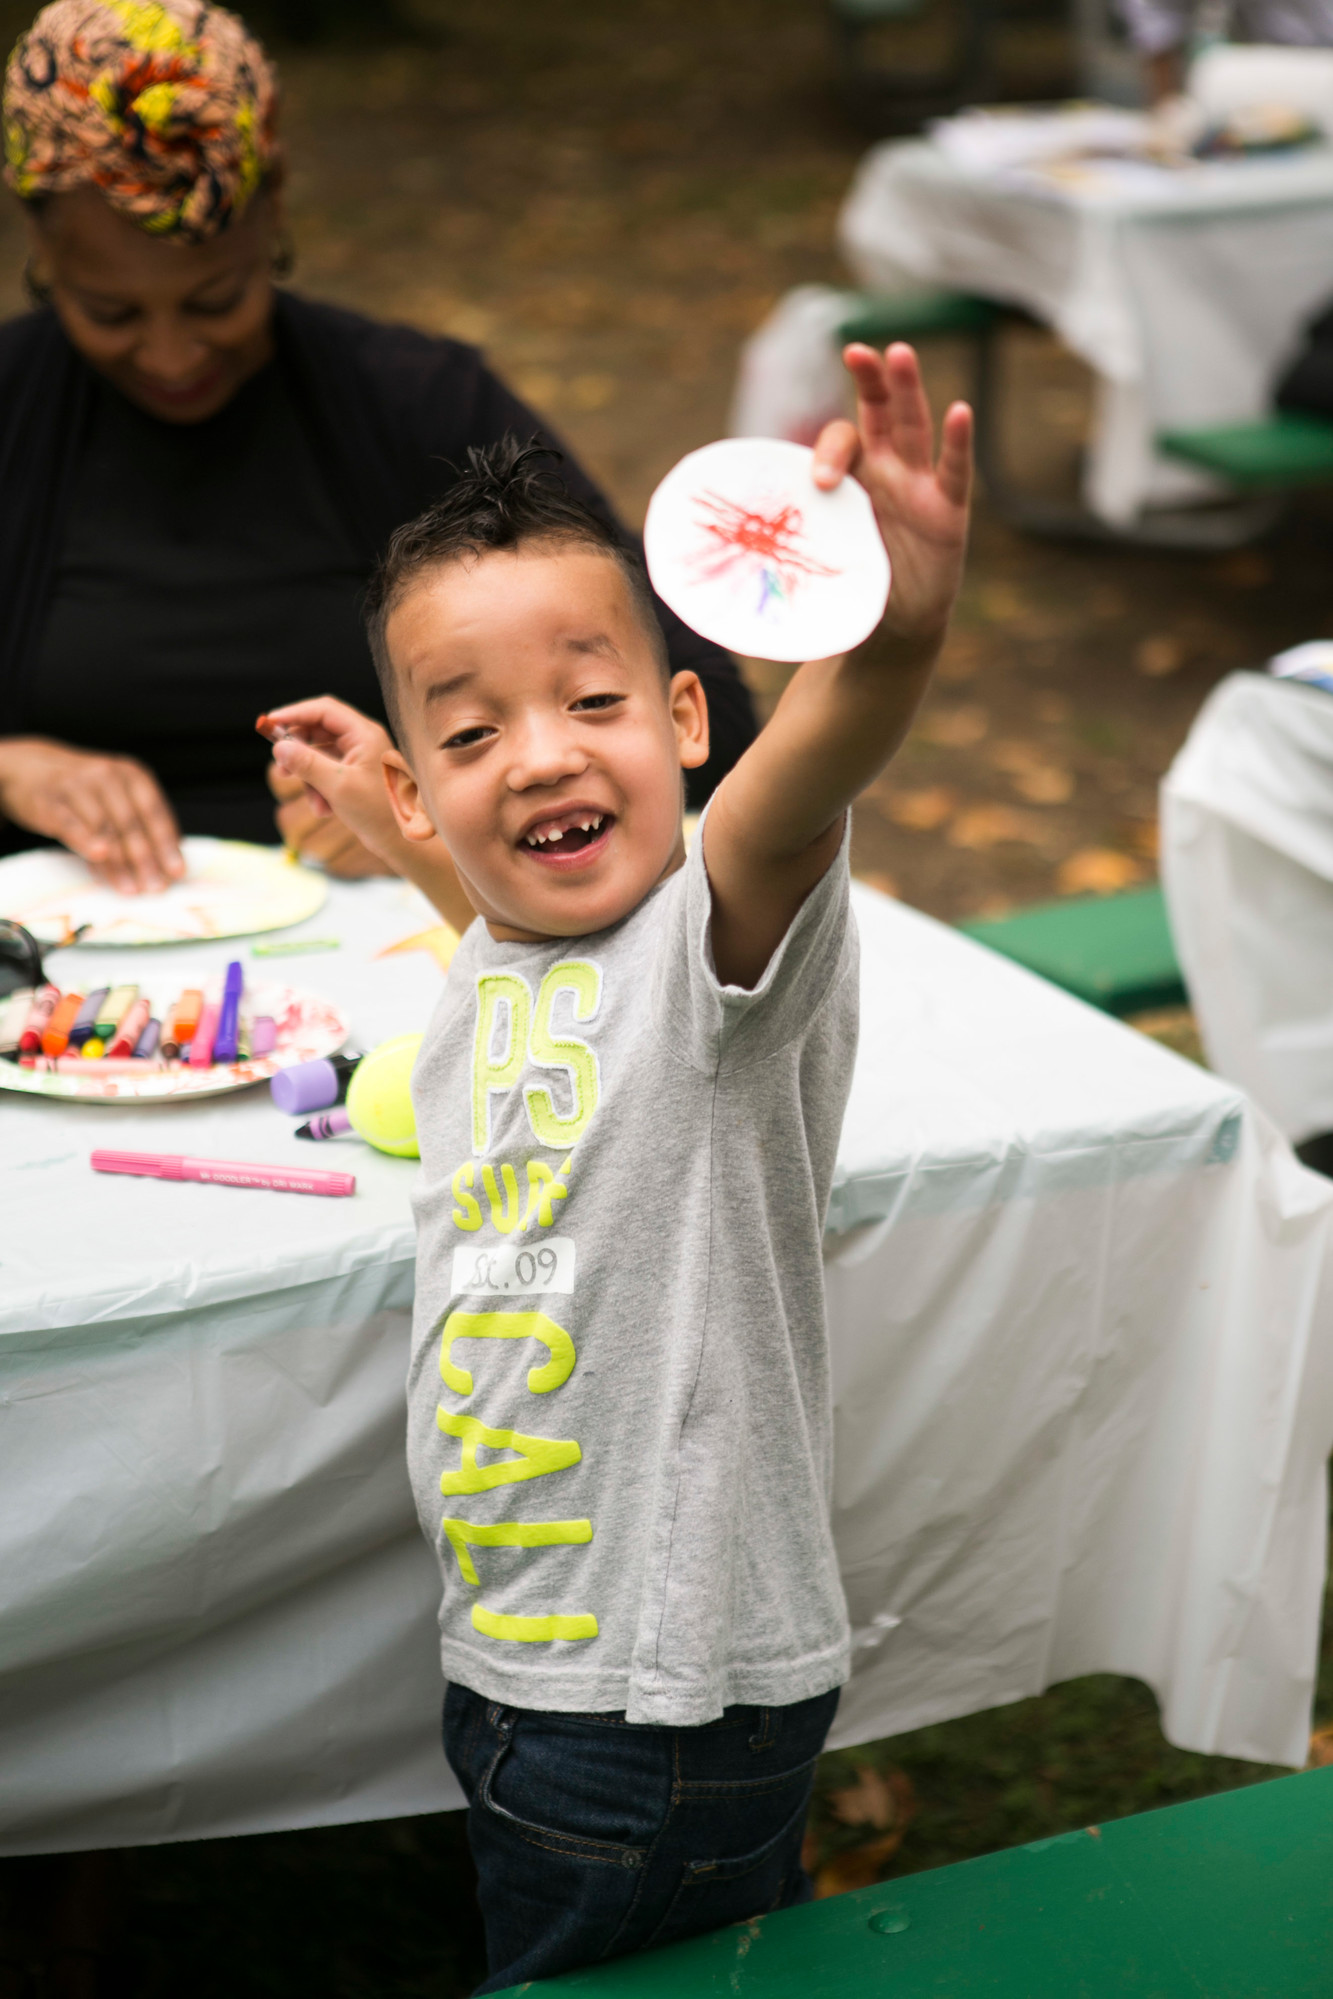 Many programs were available for the children, including art therapy with Hofstra University’s creative art therapy program.